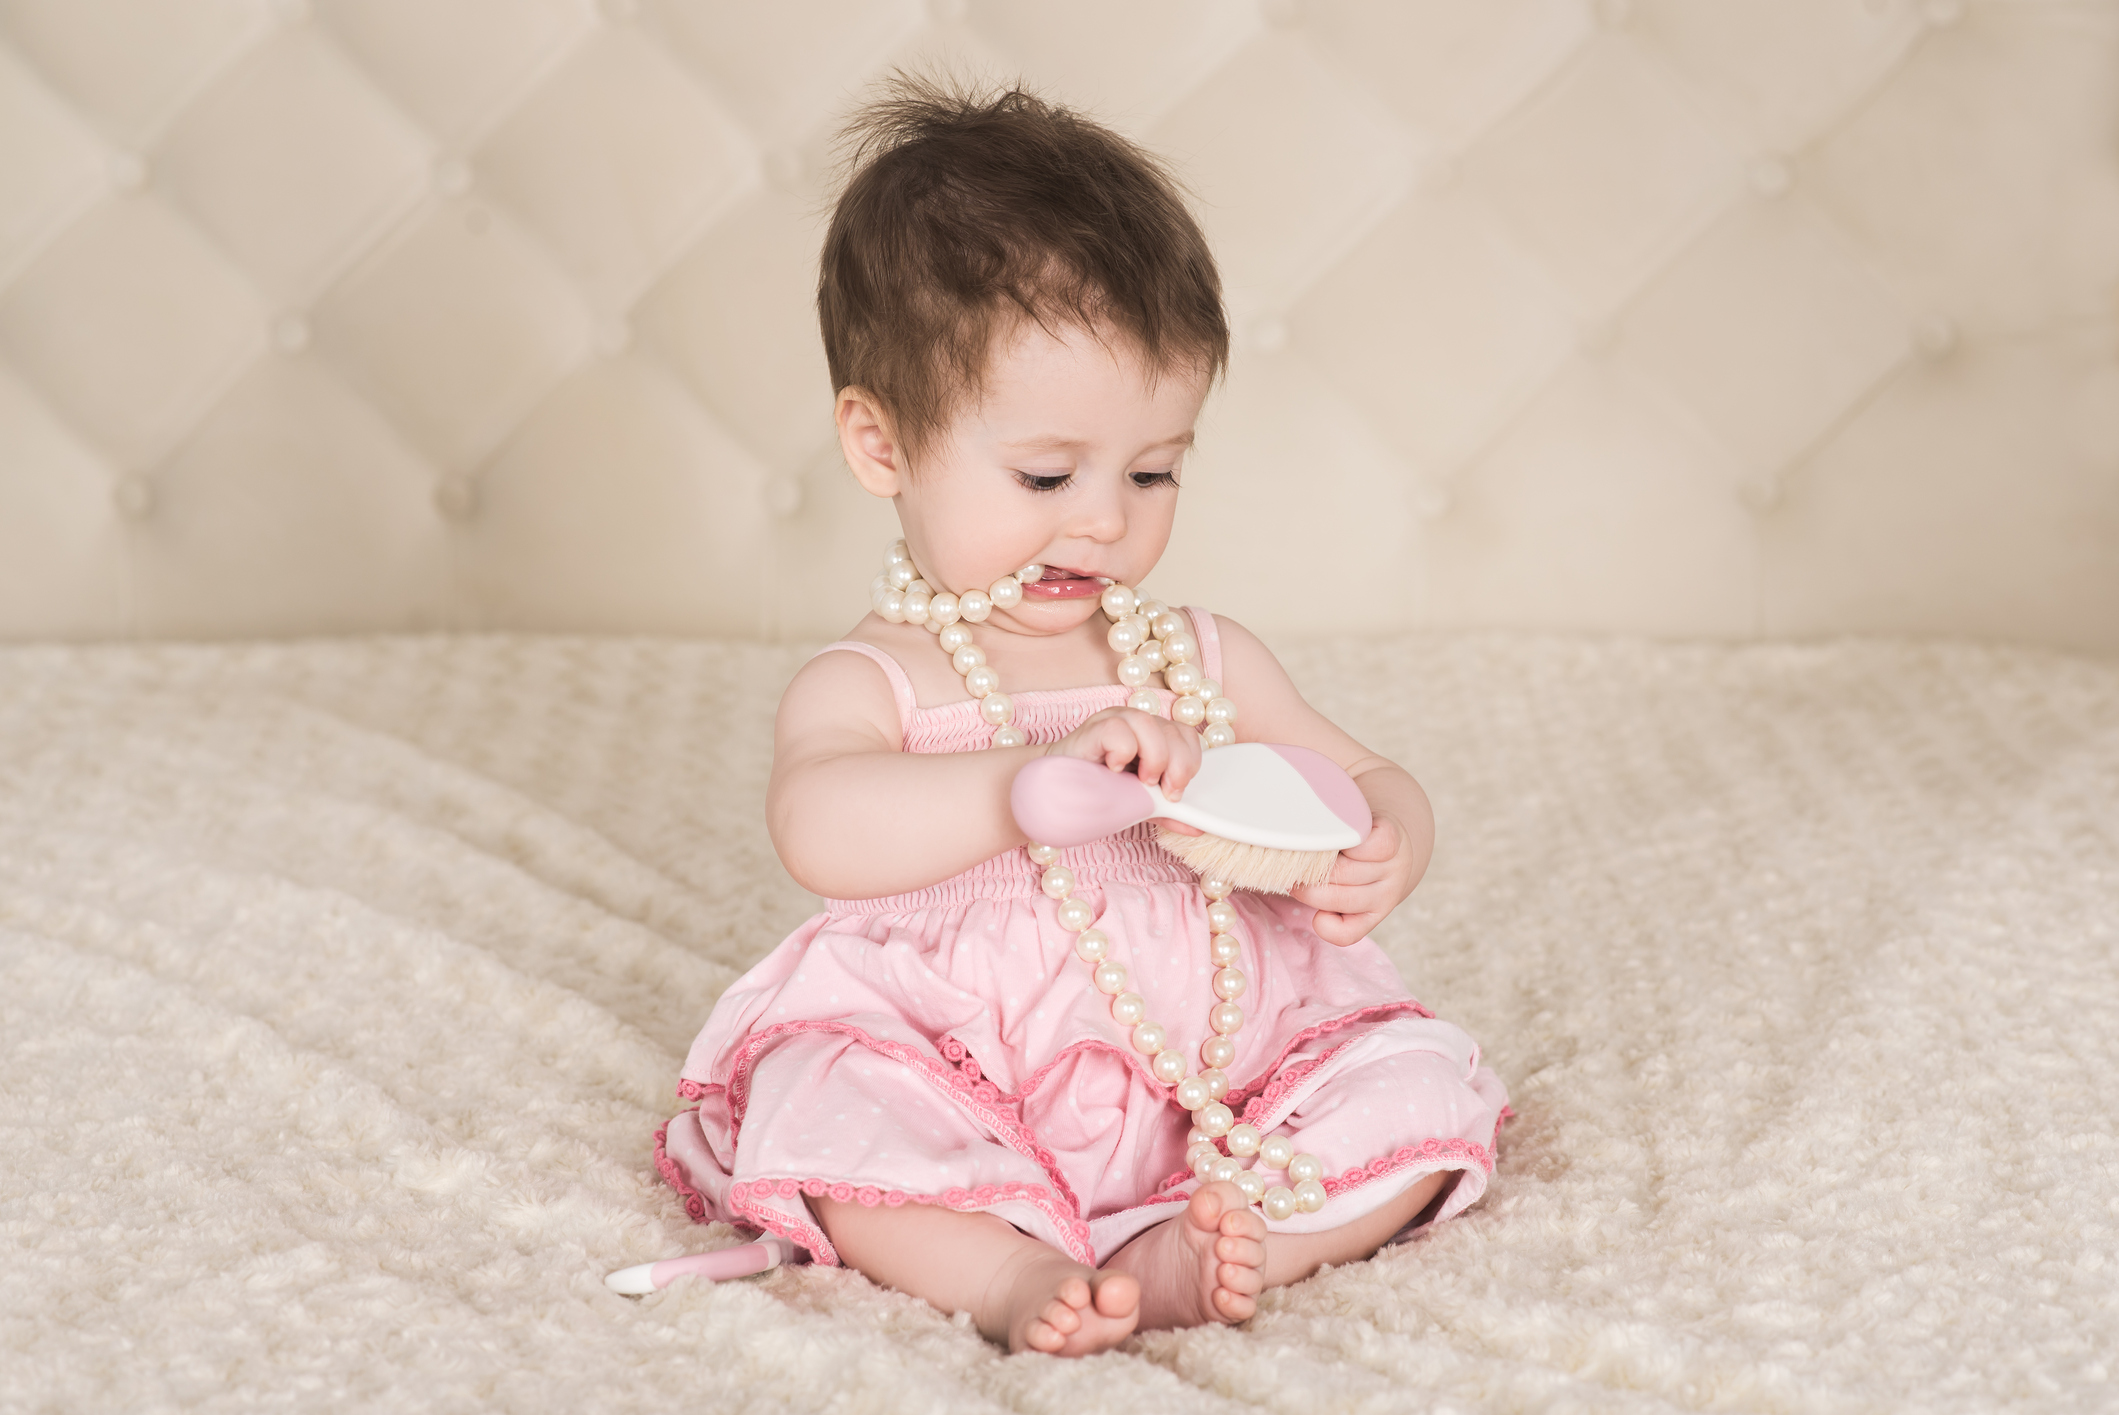 Is it safe for your baby to wear jewelry?